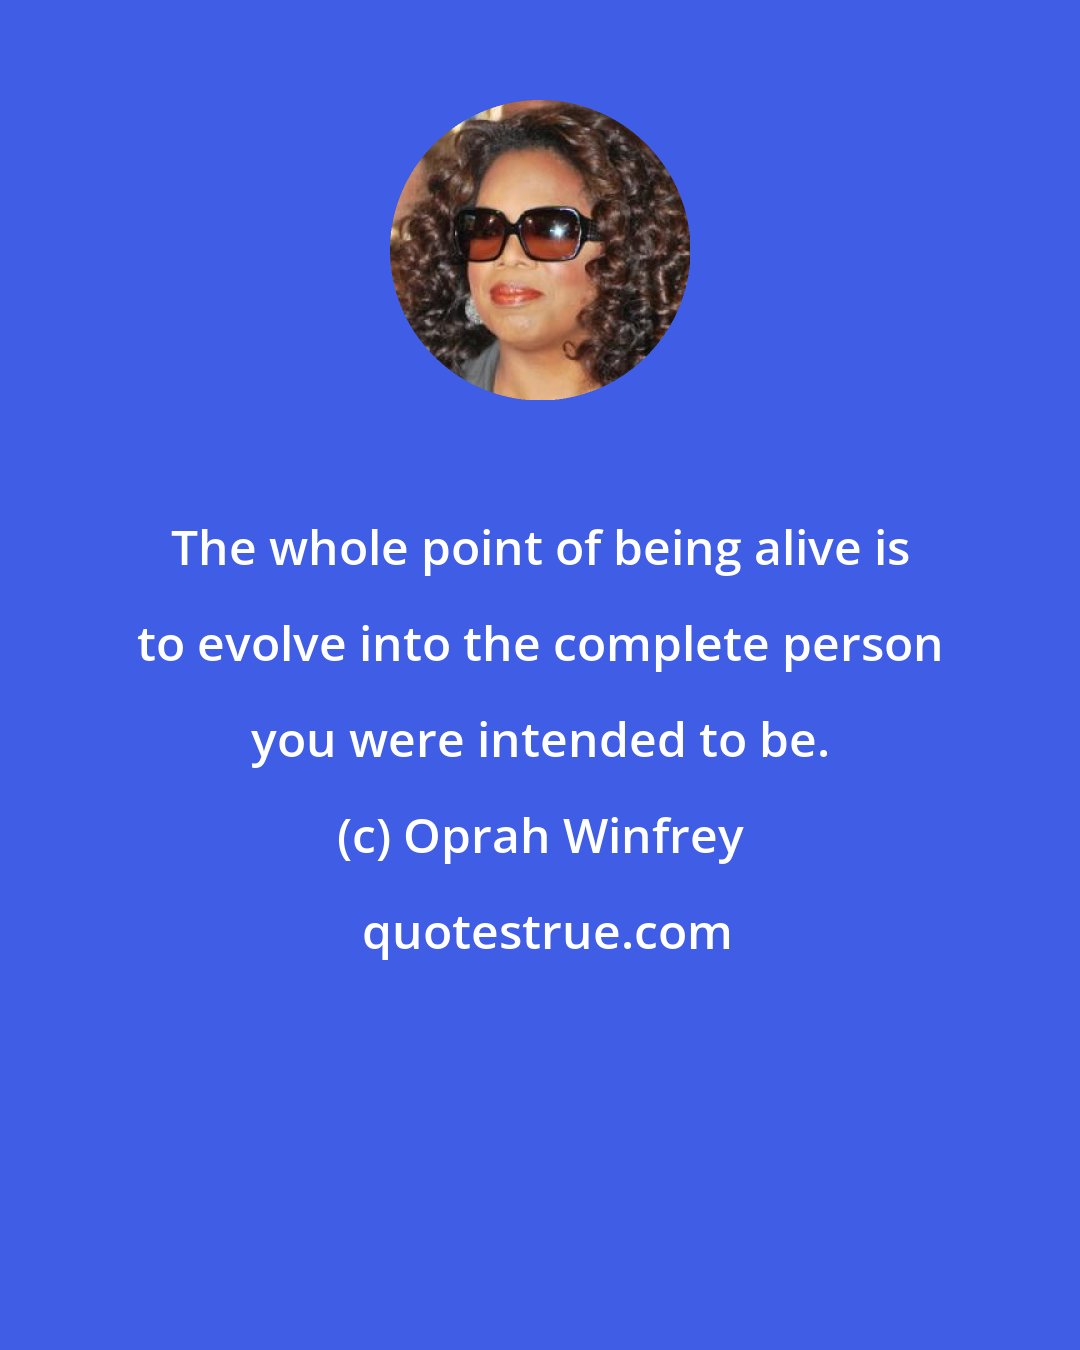 Oprah Winfrey: The whole point of being alive is to evolve into the complete person you were intended to be.